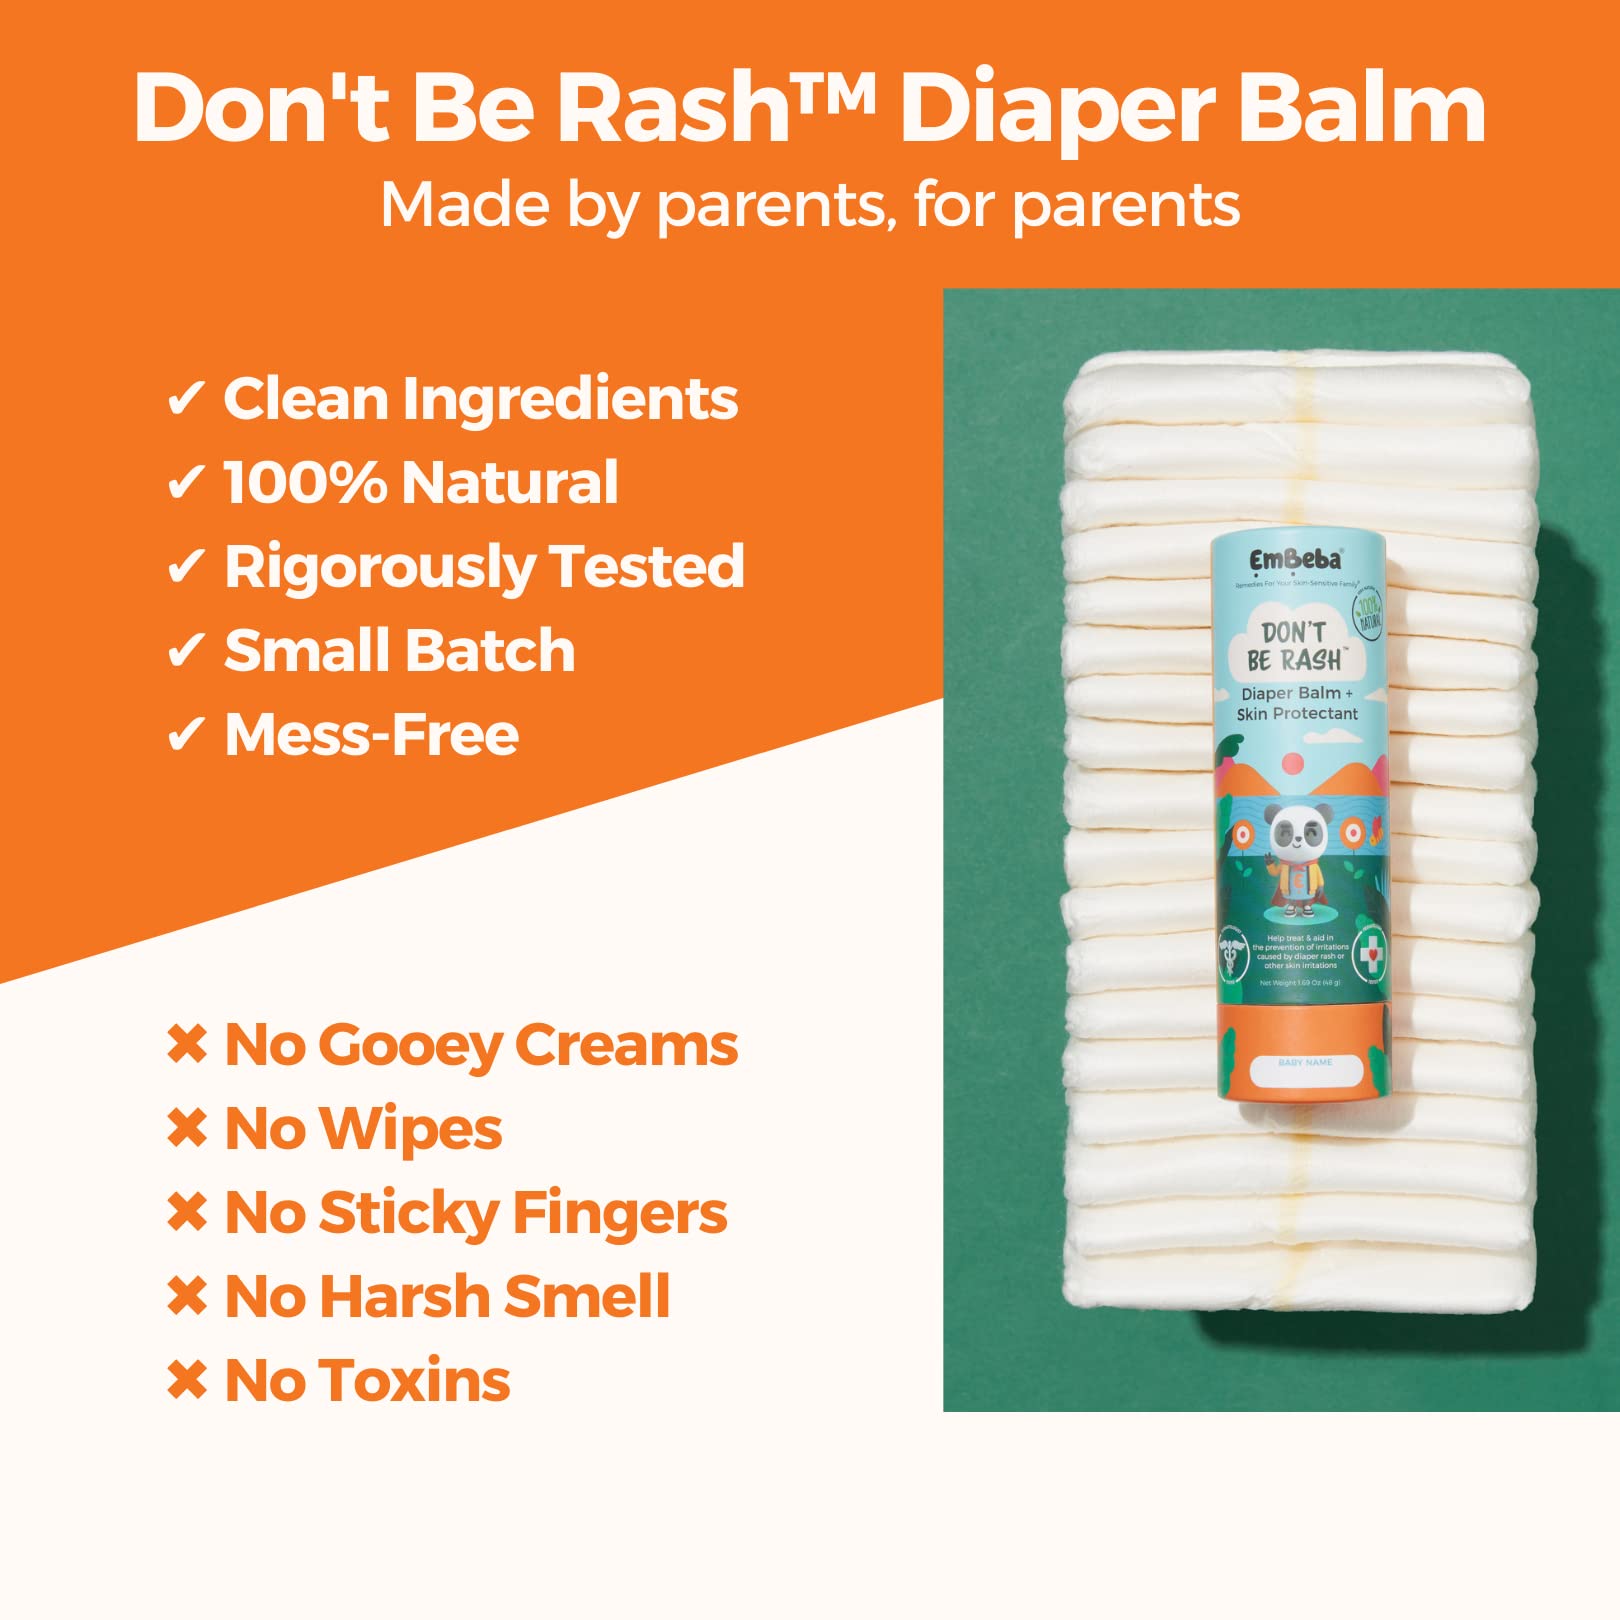 EmBeba Natural Diaper Rash Cream for Baby with Sensitive Skin | Travel Friendly Baby Rash Ointment with Built-in Diaper Balm Stick Roll-On Applicator, All Over Herbal Skin Care, 1 Pack